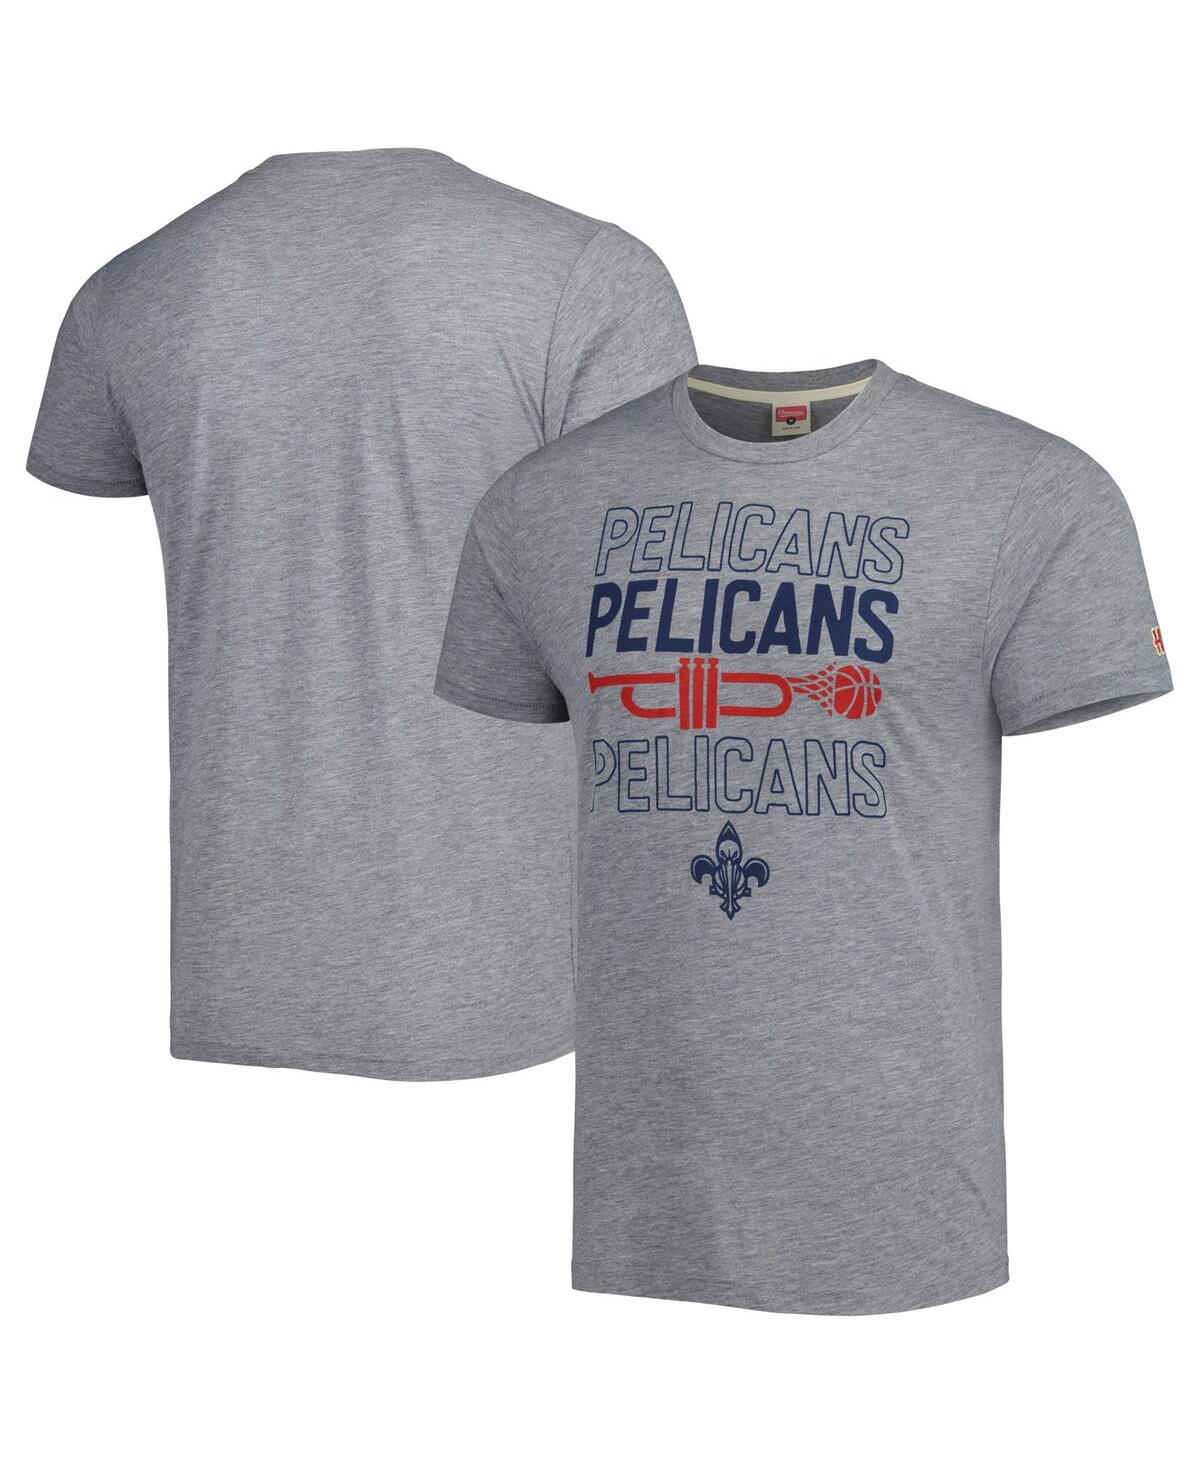 Men's and Women's Homage Heather Gray New Orleans Pelicans Hometown Hyper Local Tri-Blend T-shirt - Heather Gray